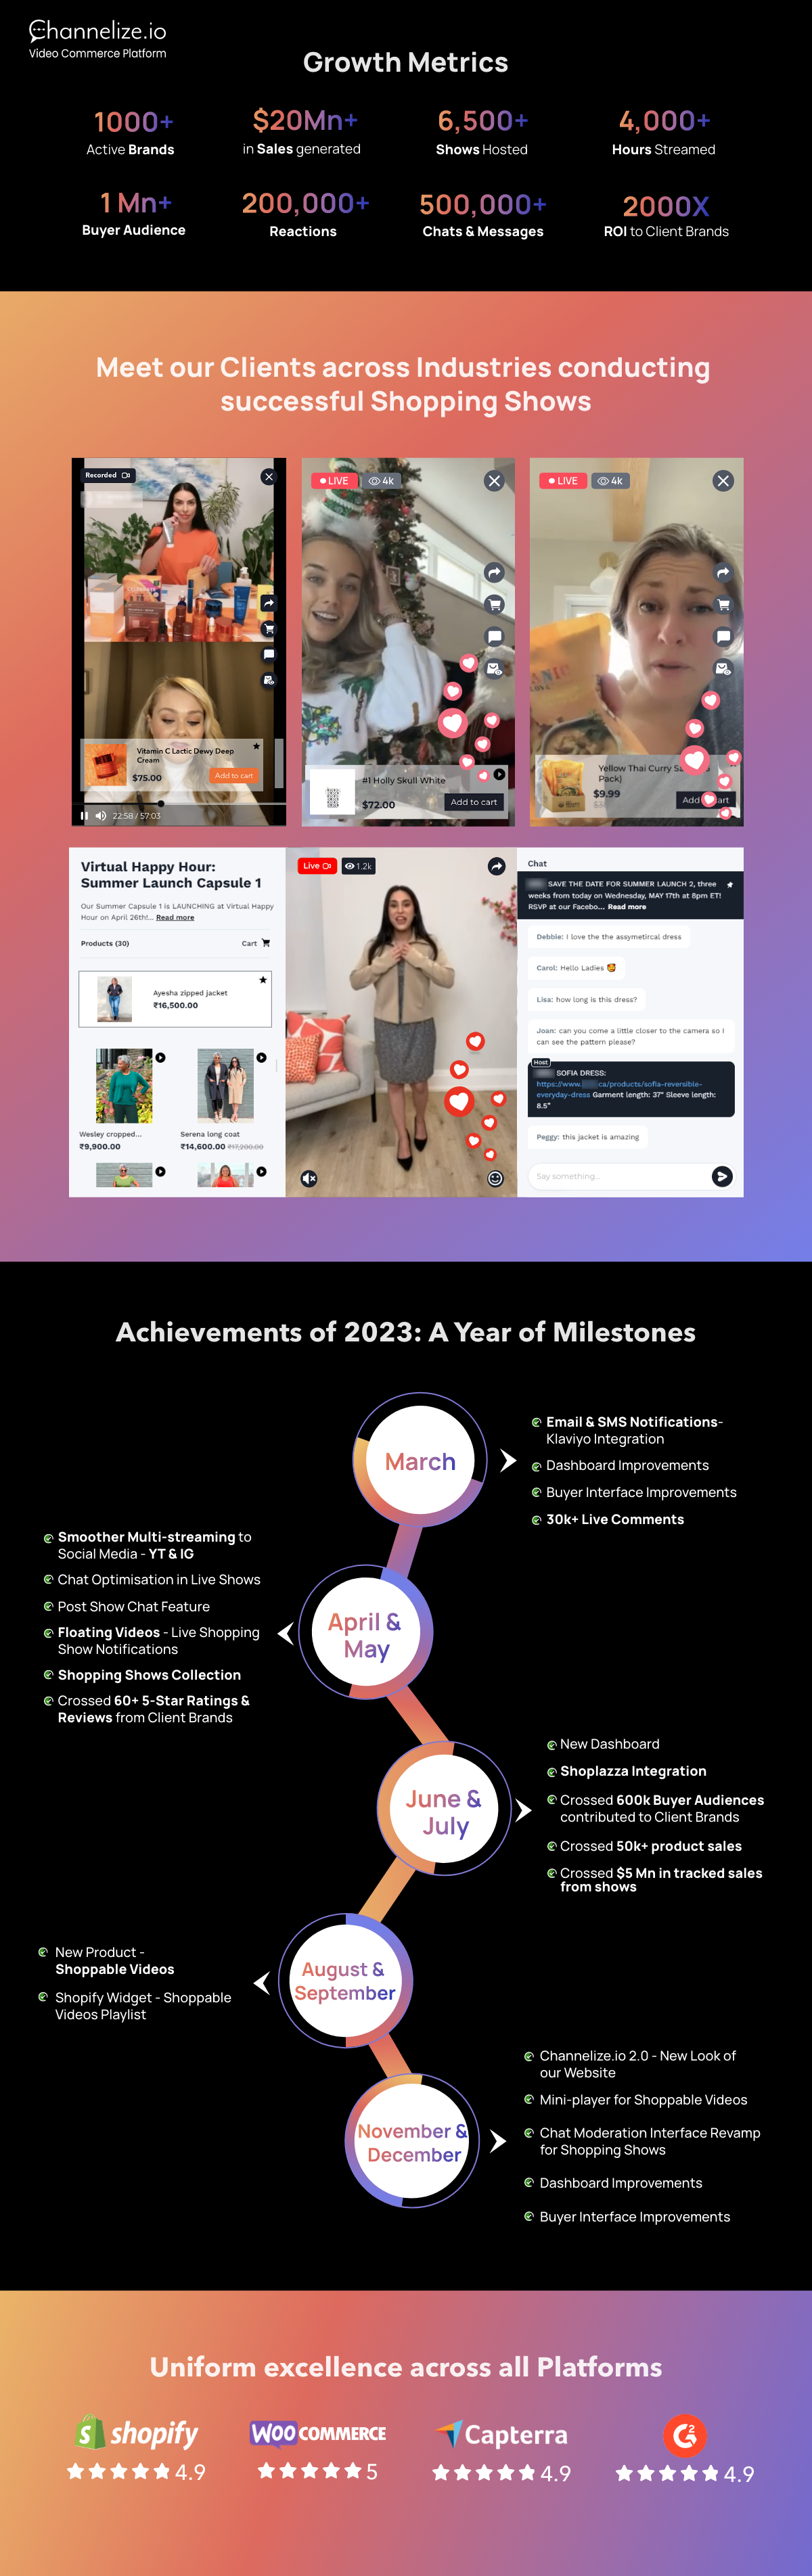 Celebrating 2023: A Year of Triumphs and Growth at Channelize.io